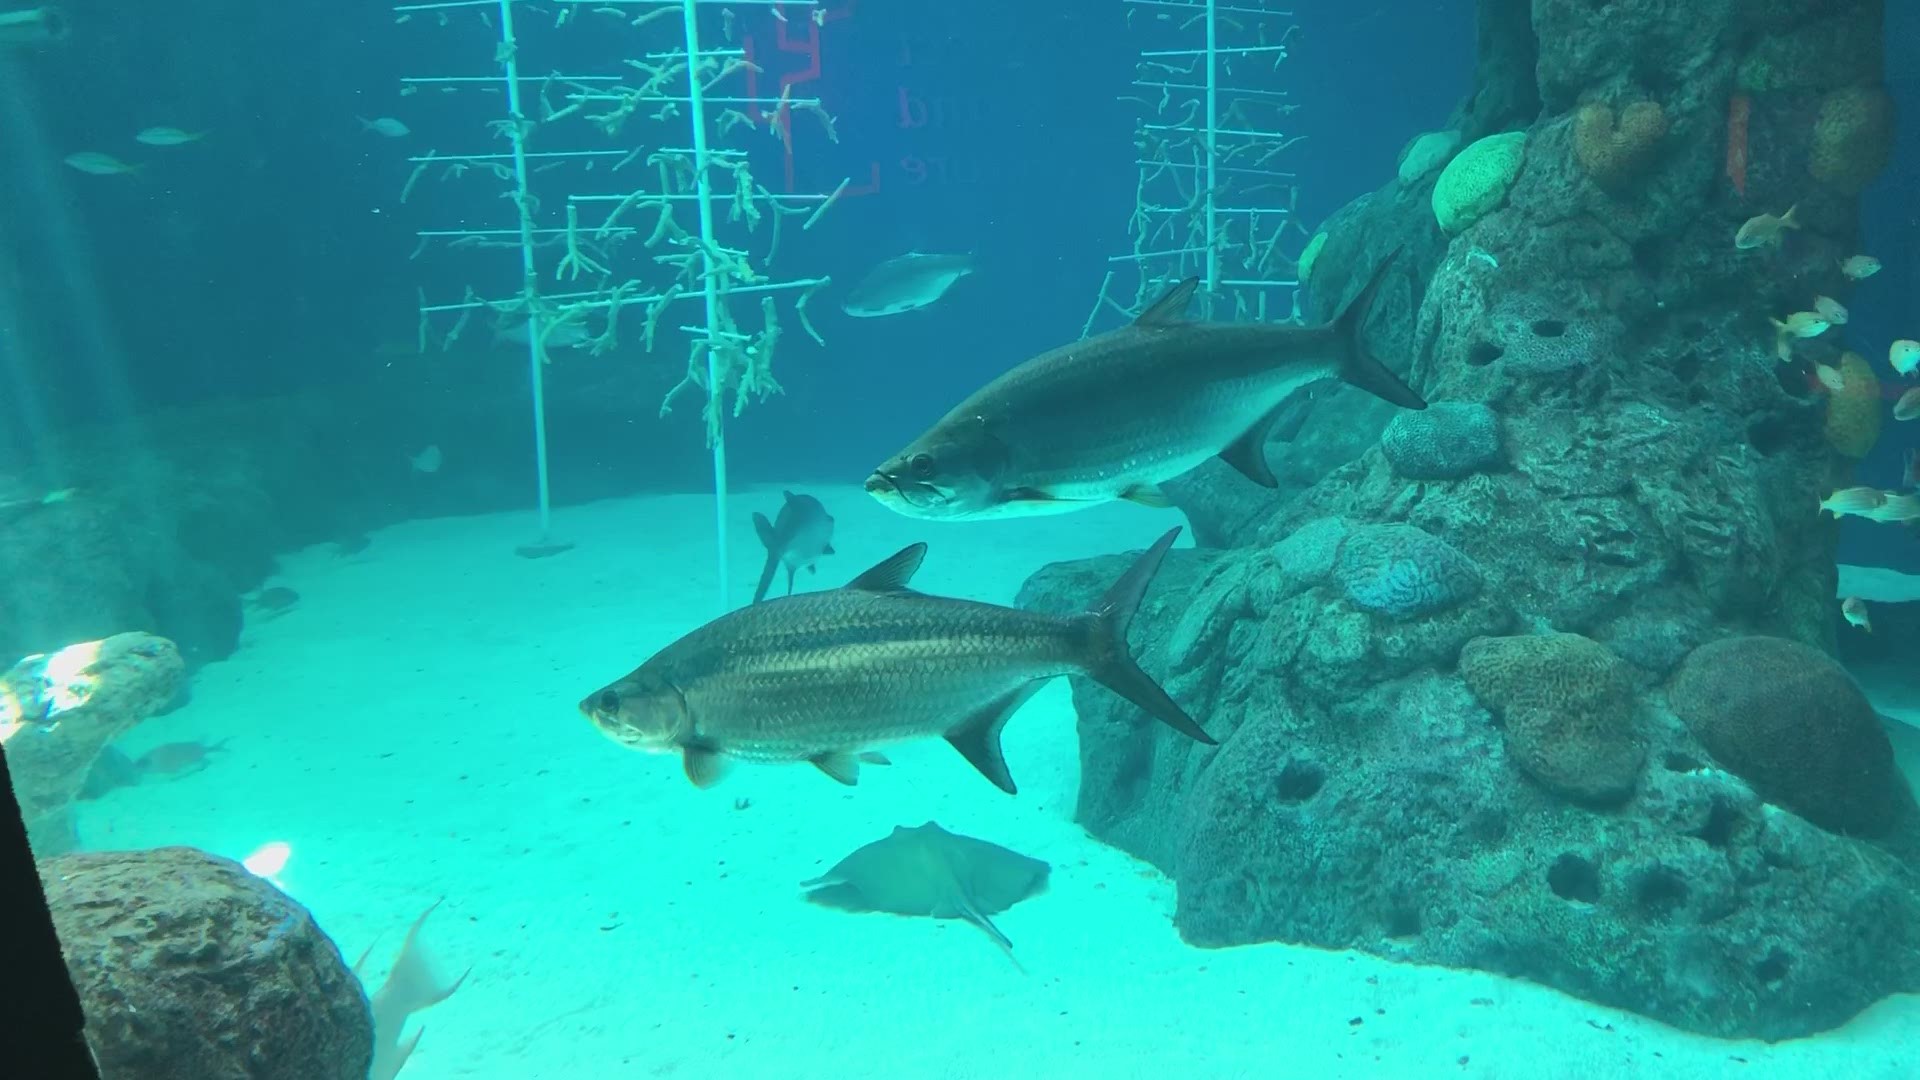 An adjunct biology professor at UMHB who interviewed for a job at the proposed Temple mall aquarium walked away with serious concerns and he wasn't the only one.